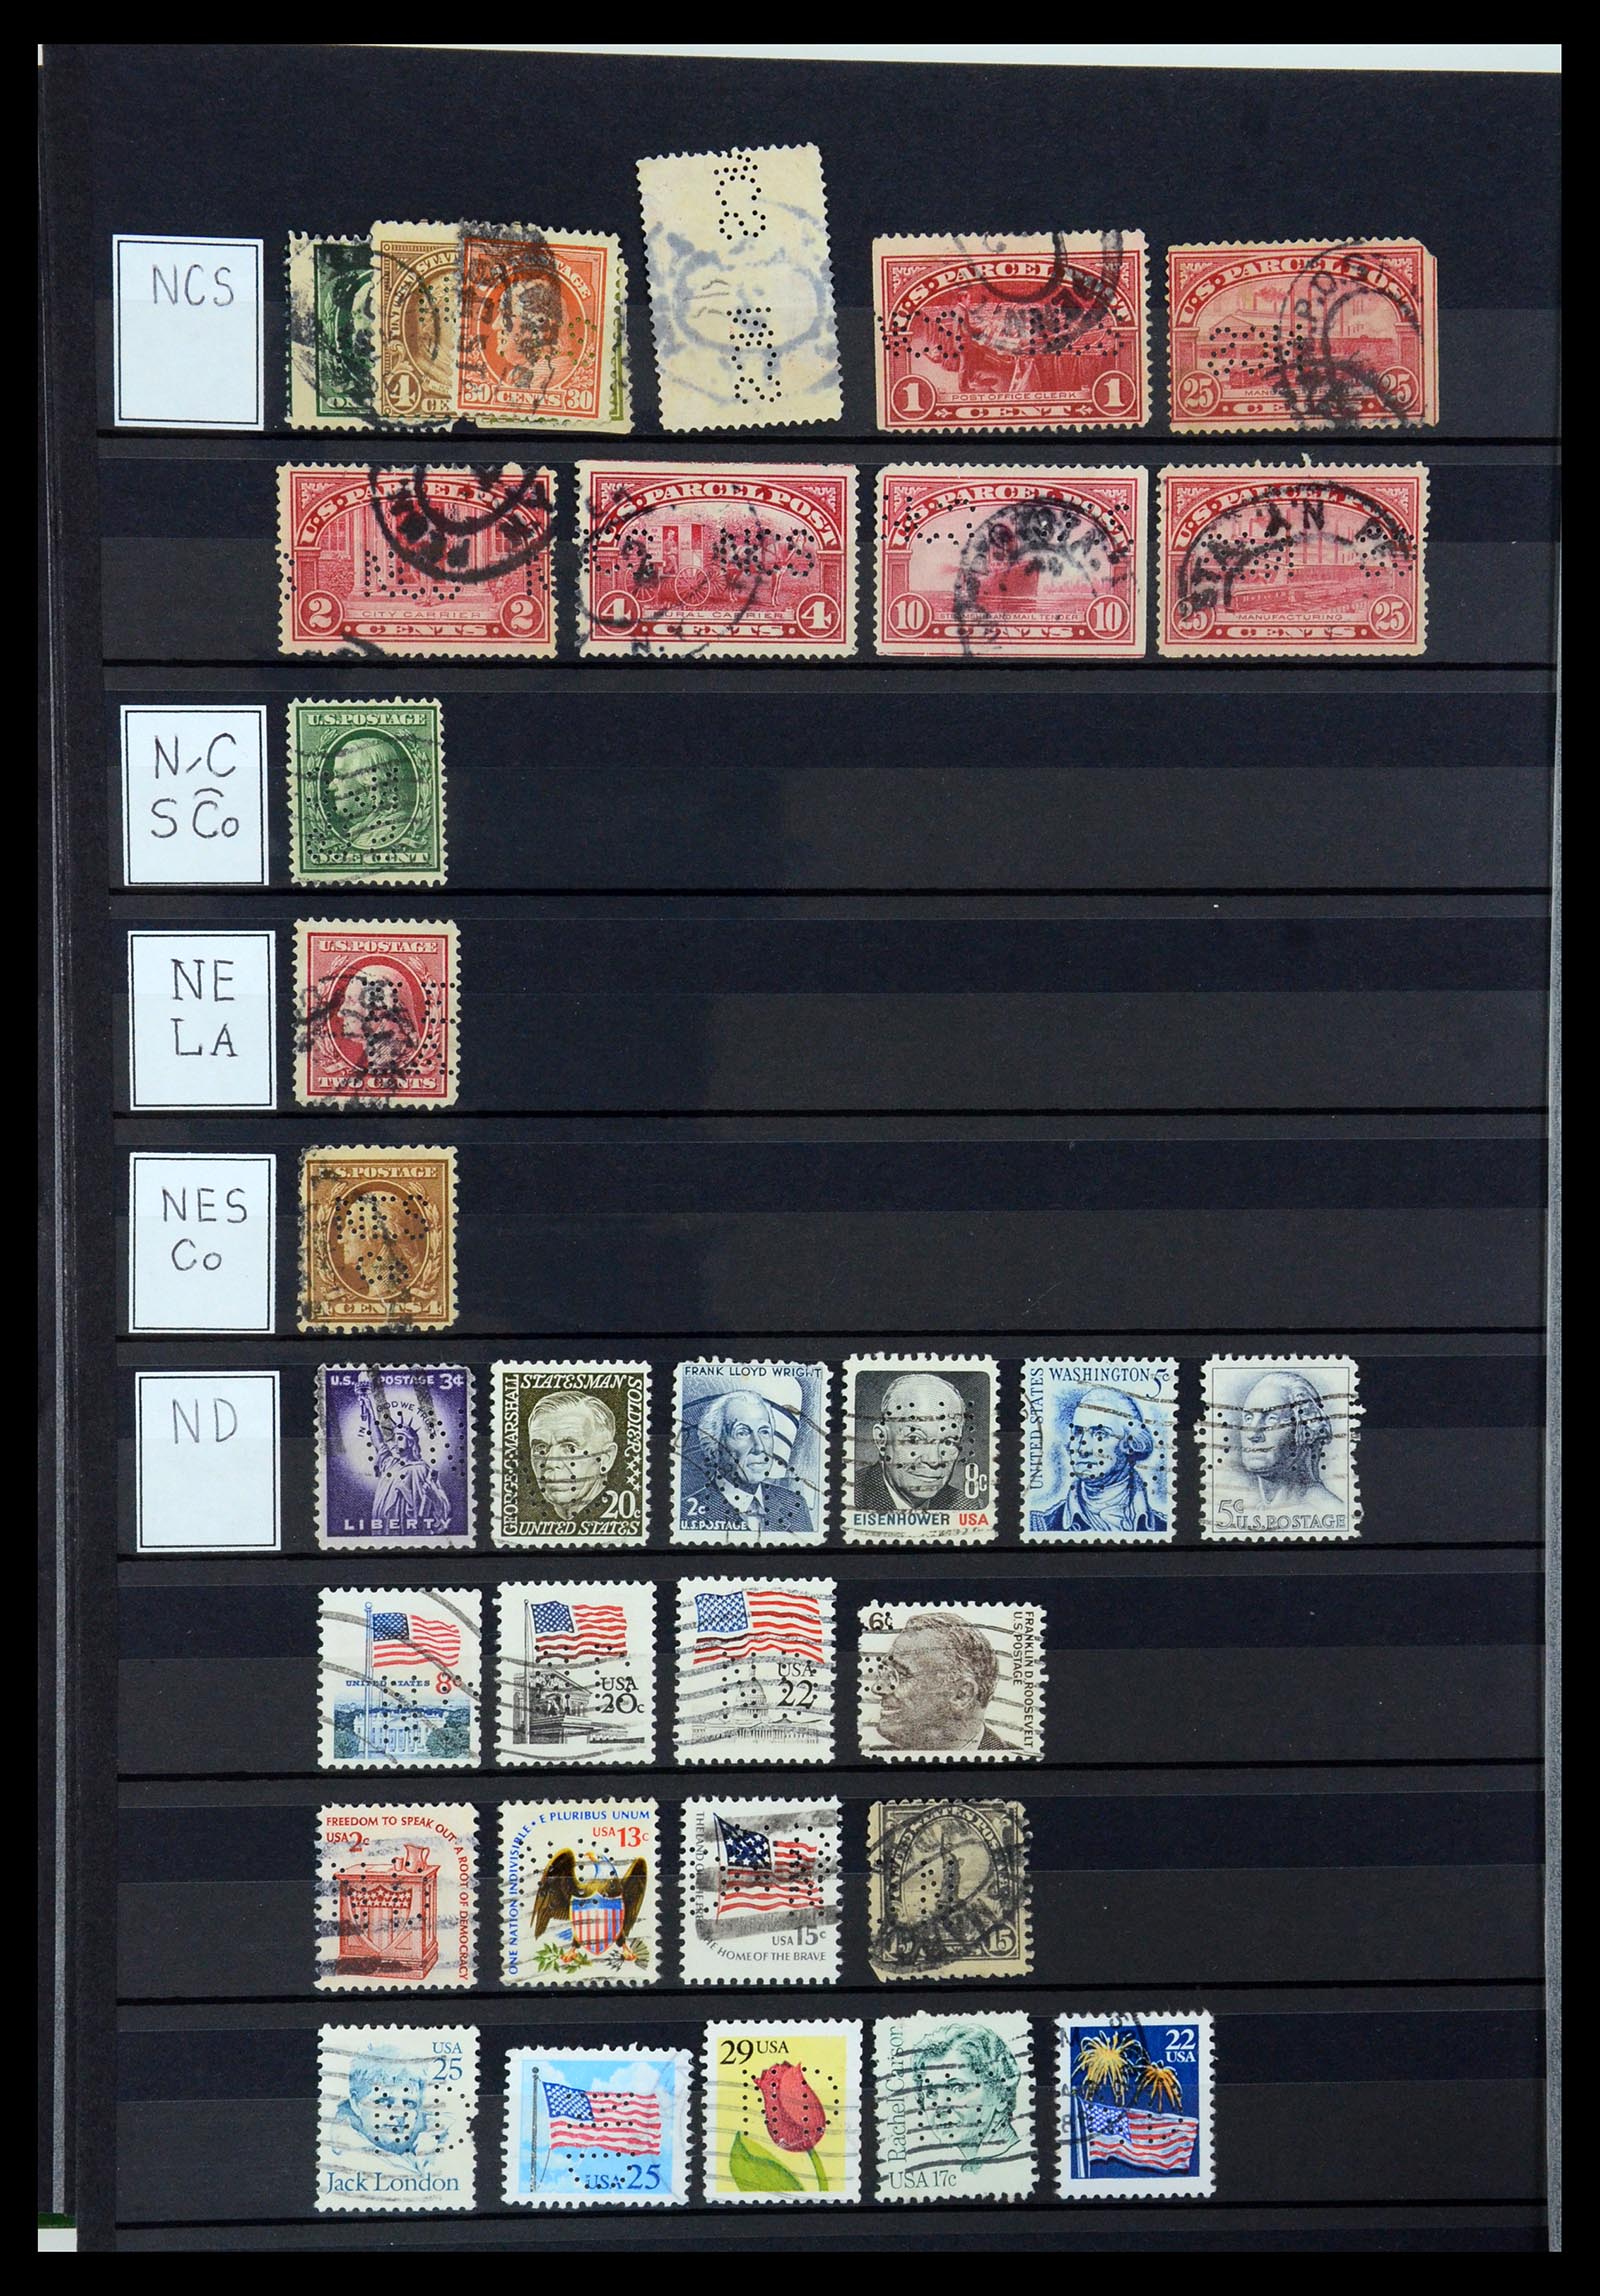 36388 096 - Stamp collection 36388 USA perfins.